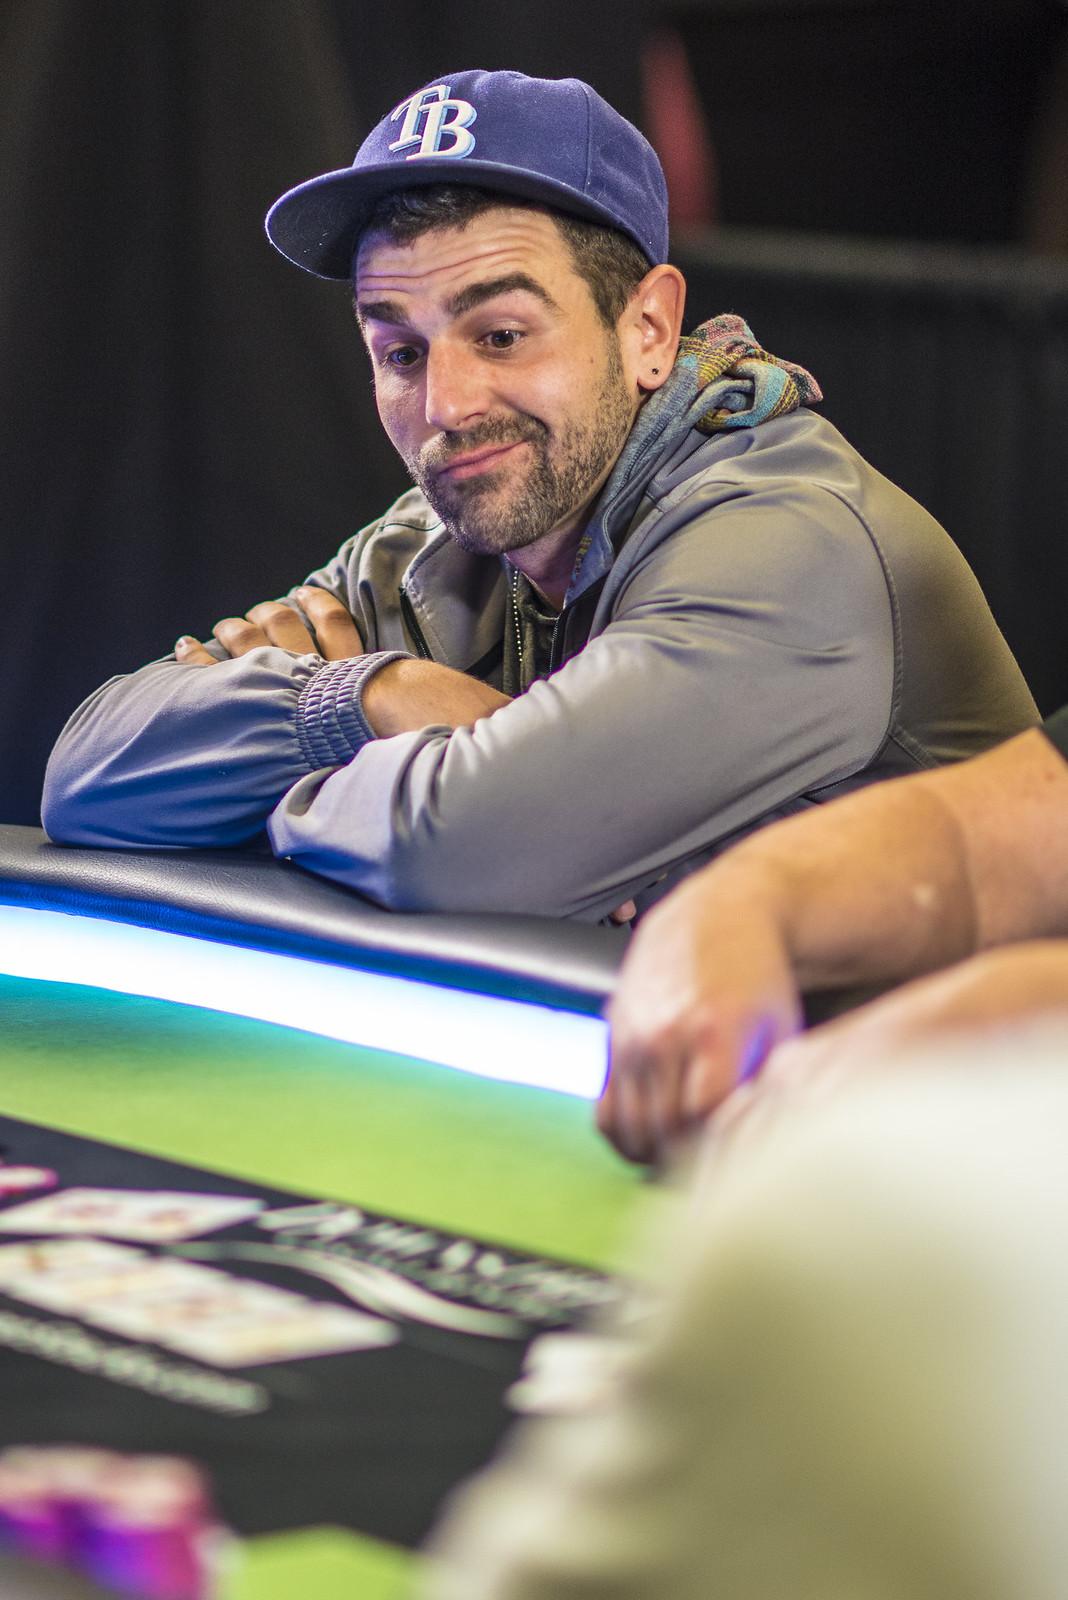 Anthony Astarita Eliminated in 7th Place